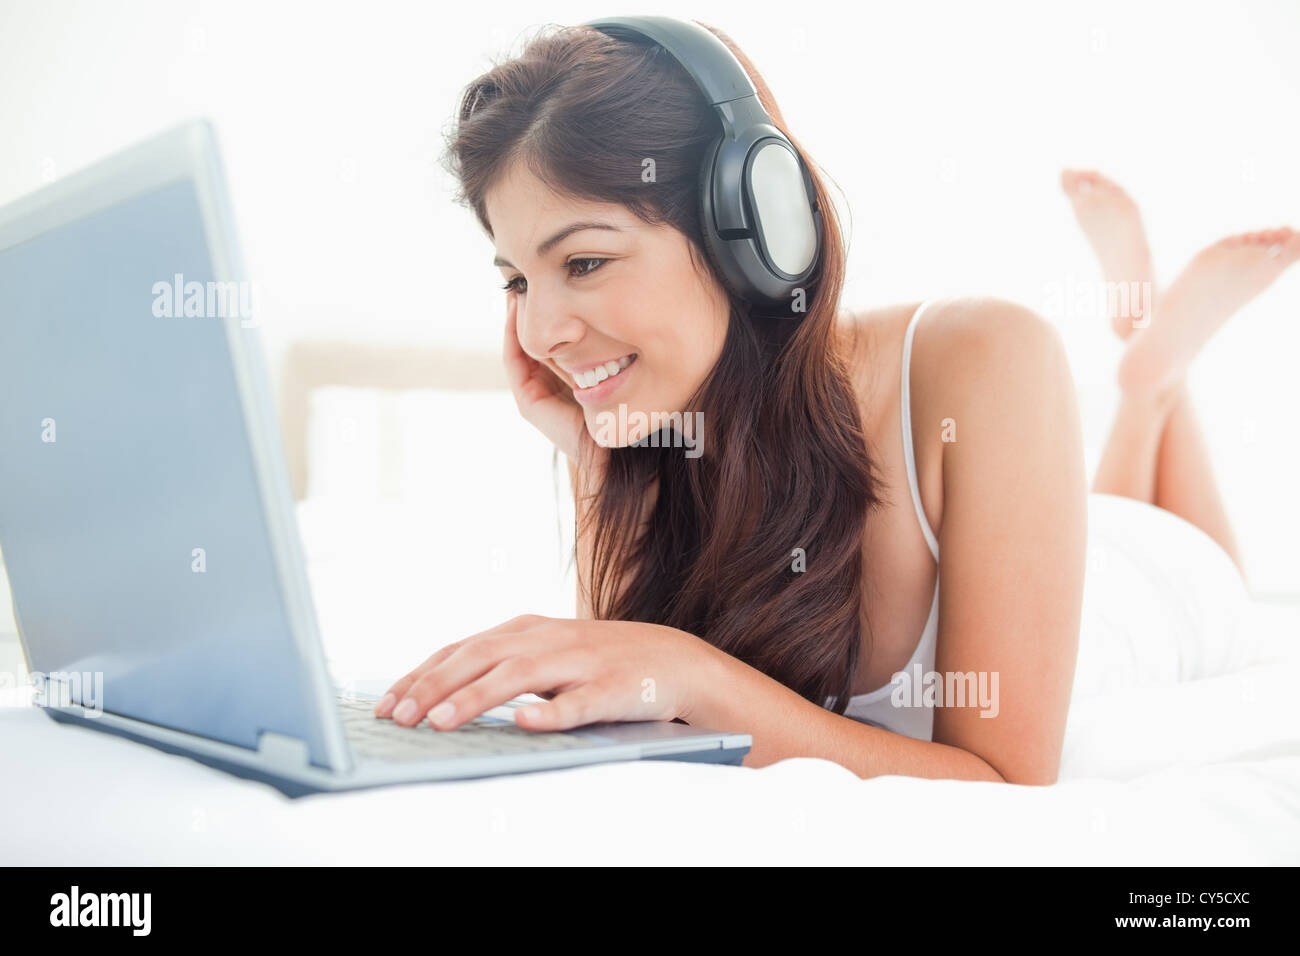 Woman watching her laptop screen and listening to her headphones with crossed legs resting on a bed Stock Photo